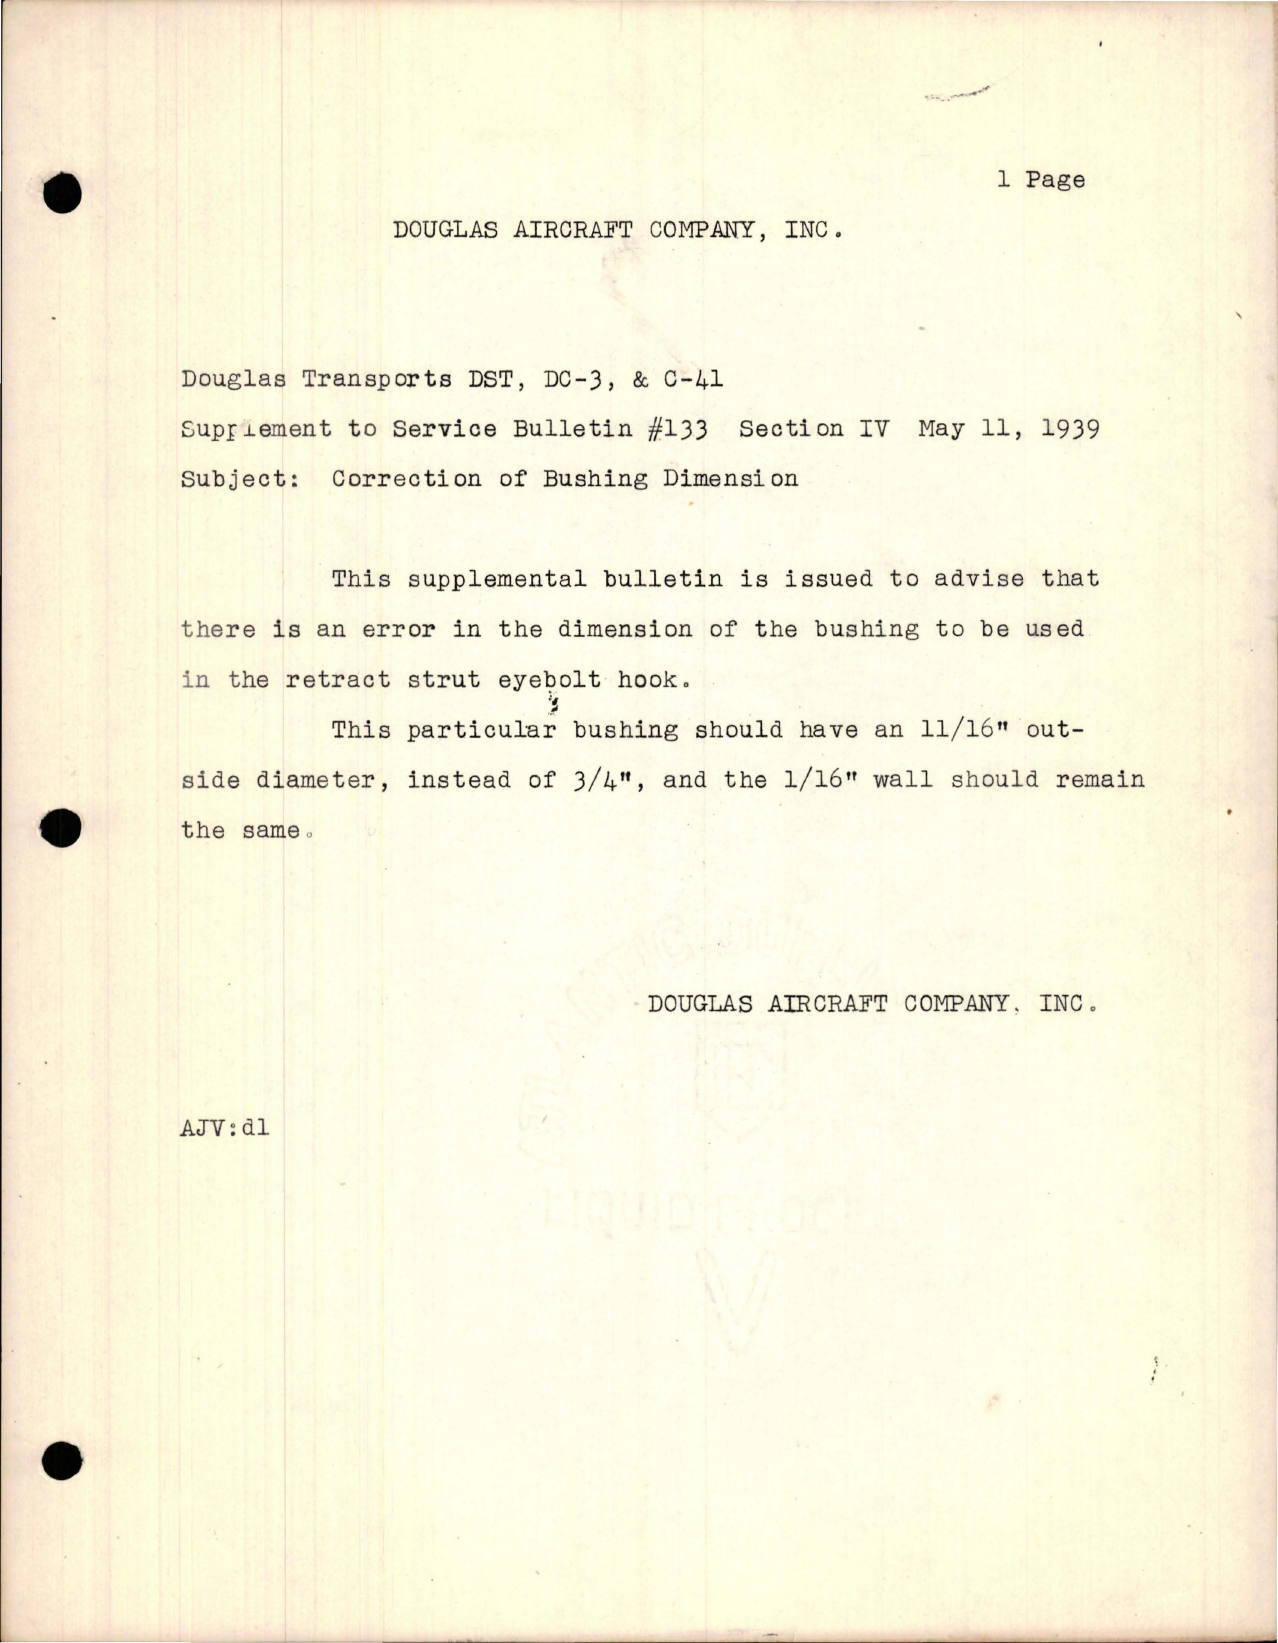 Sample page 1 from AirCorps Library document: Correction of Bushing Dimension